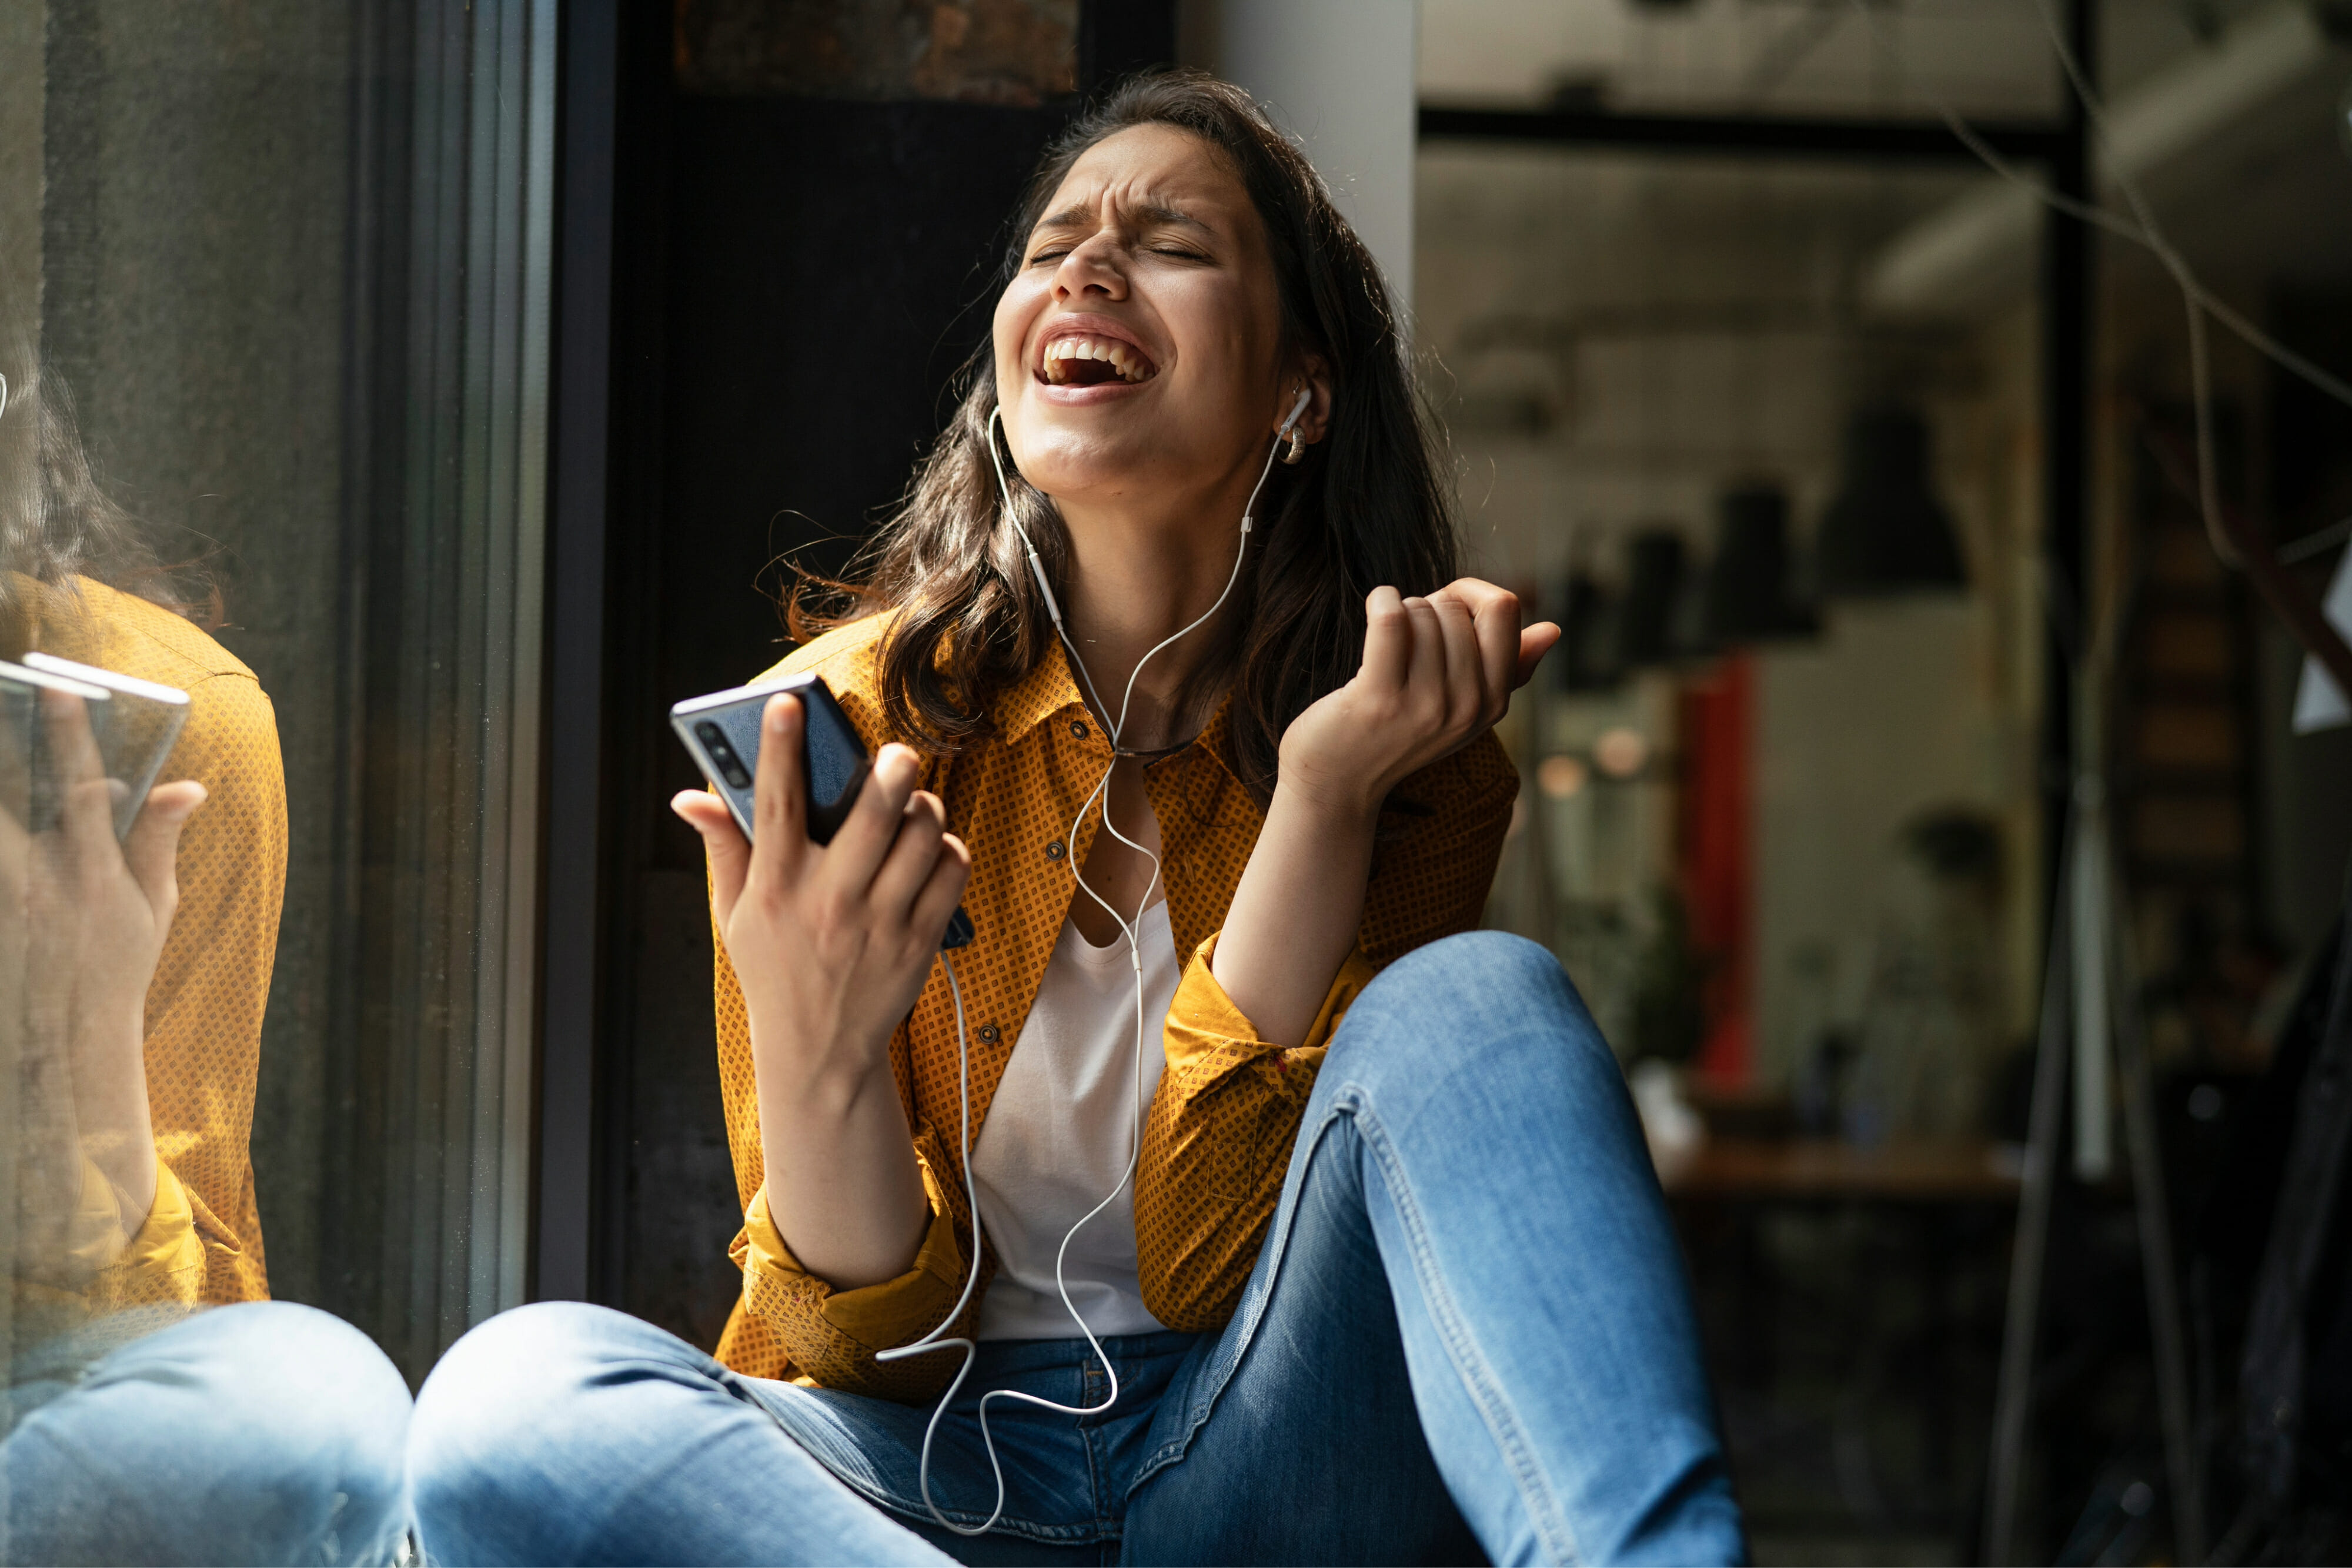 Young woman sitting and listening to music with earphones while singing a song